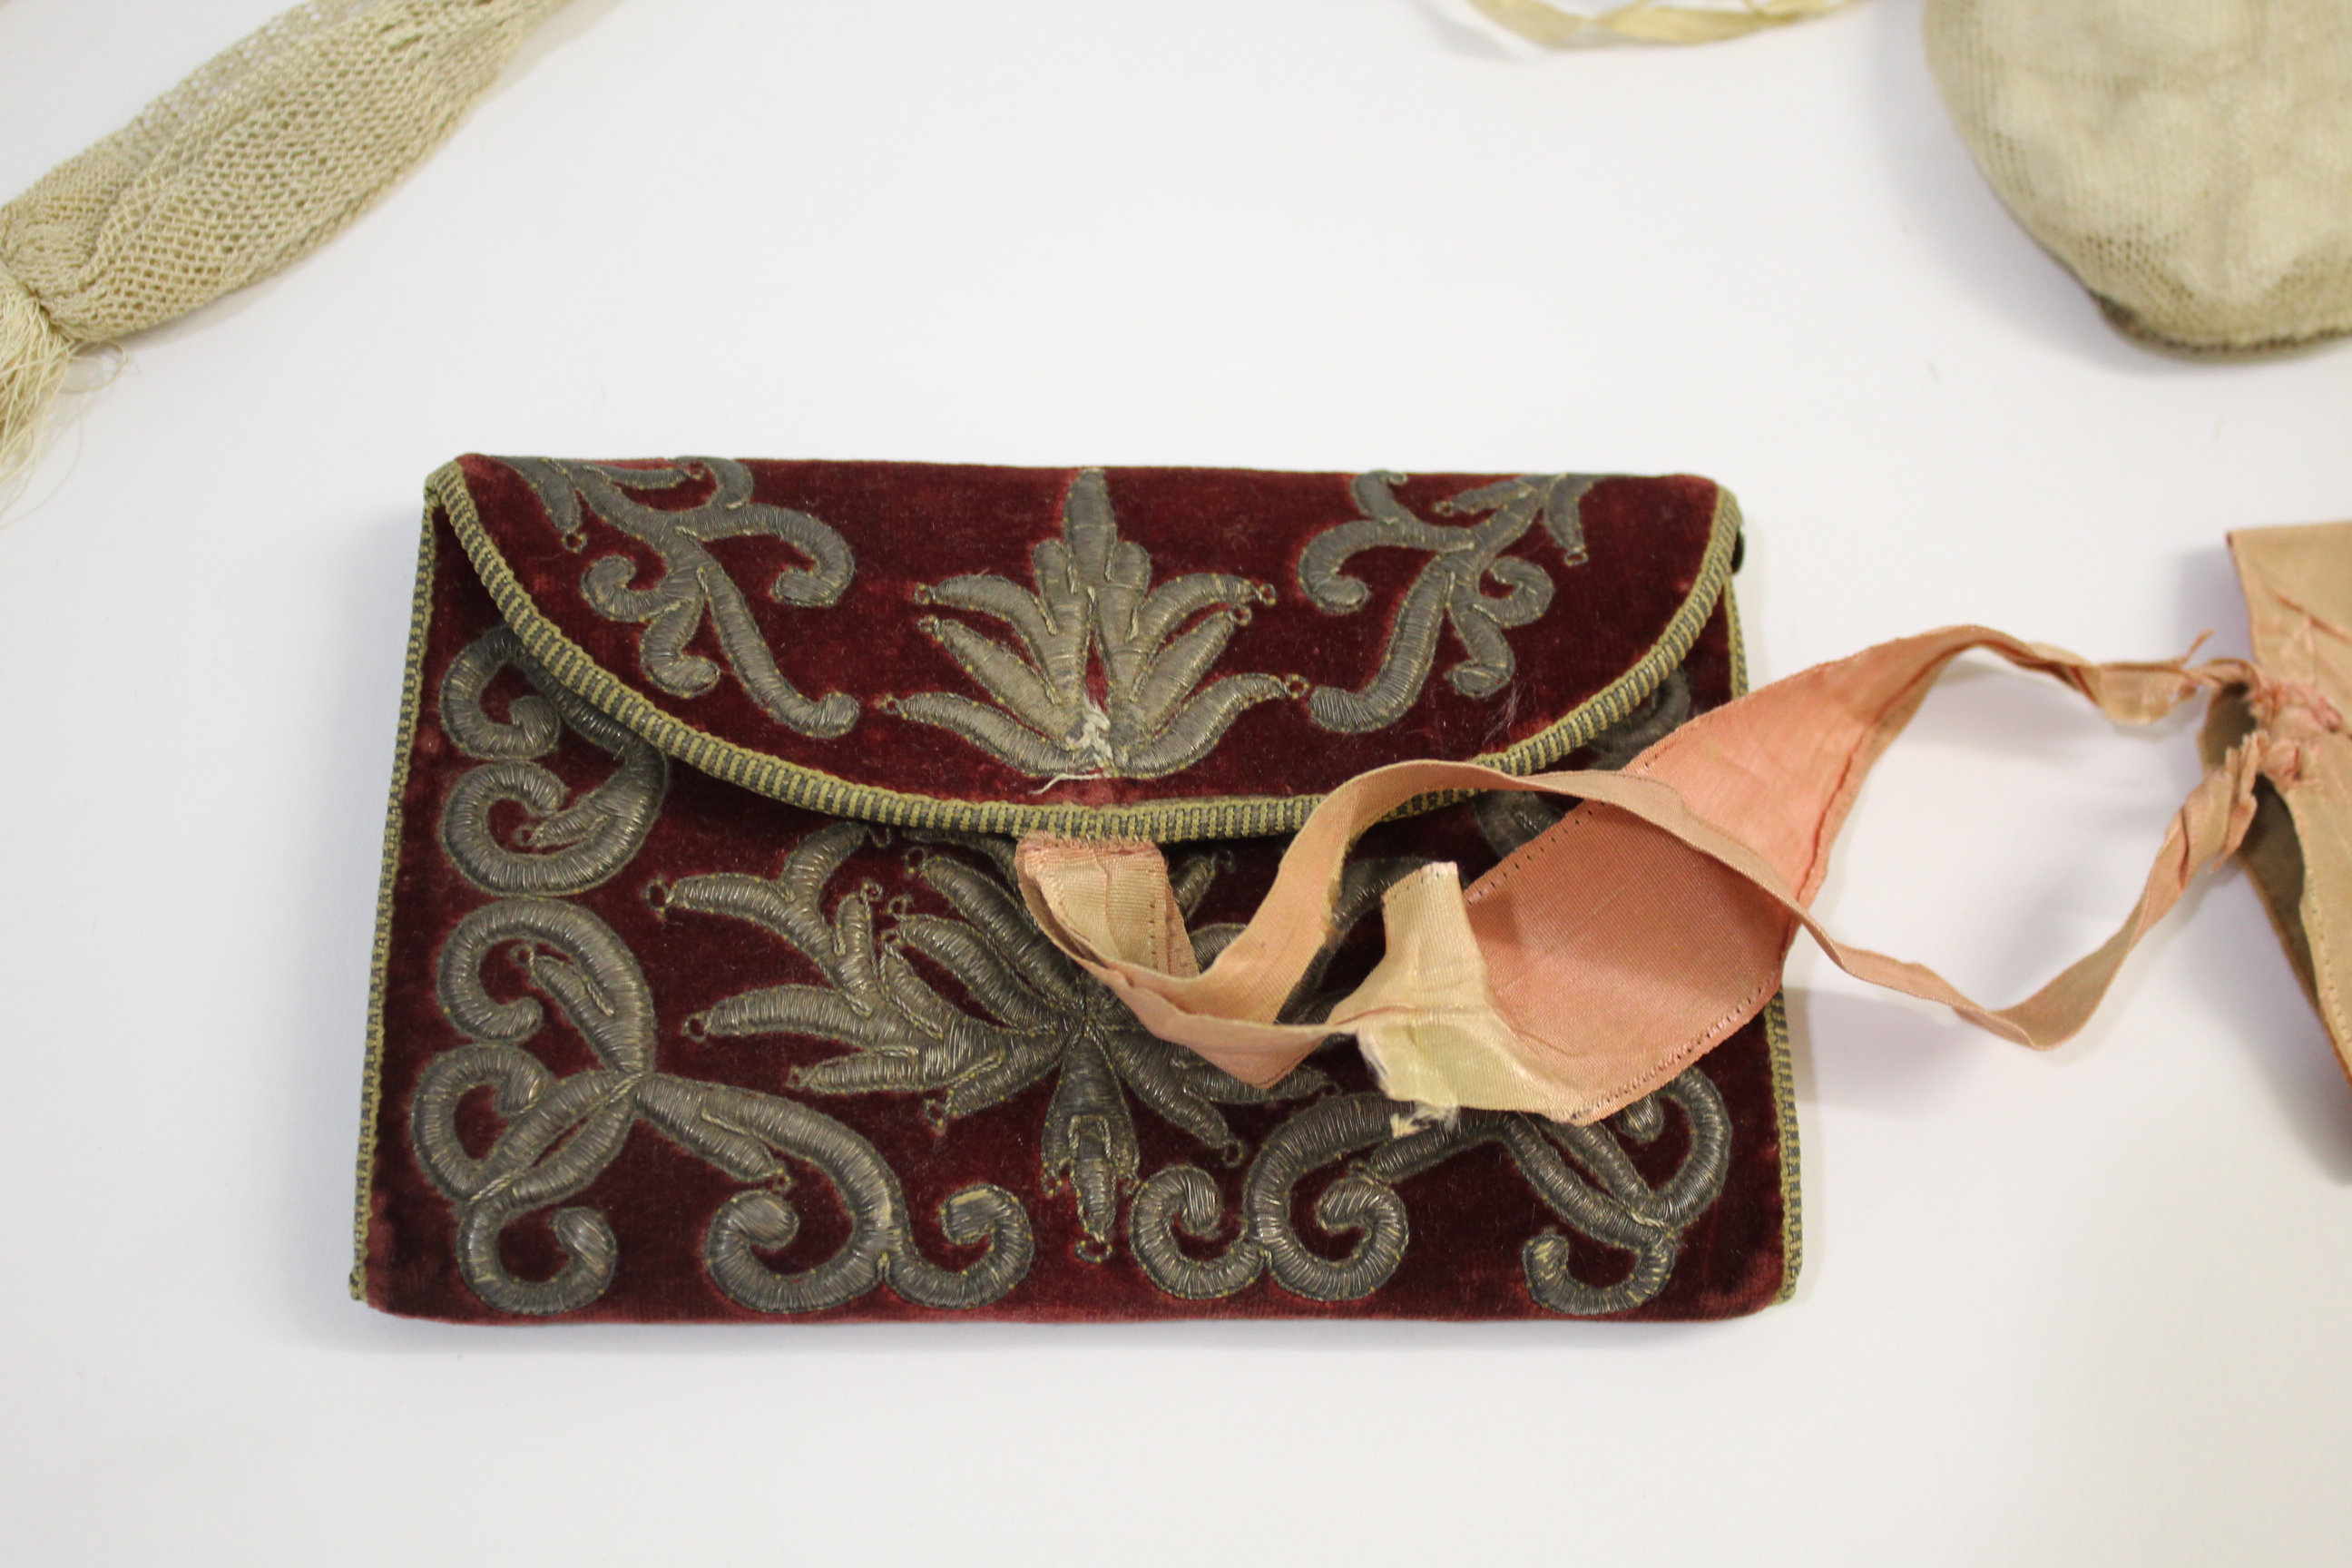 18THC CARD CASE & VINTAGE PURSES a late 18thc dark red velvet card case with metallic thread - Image 2 of 11